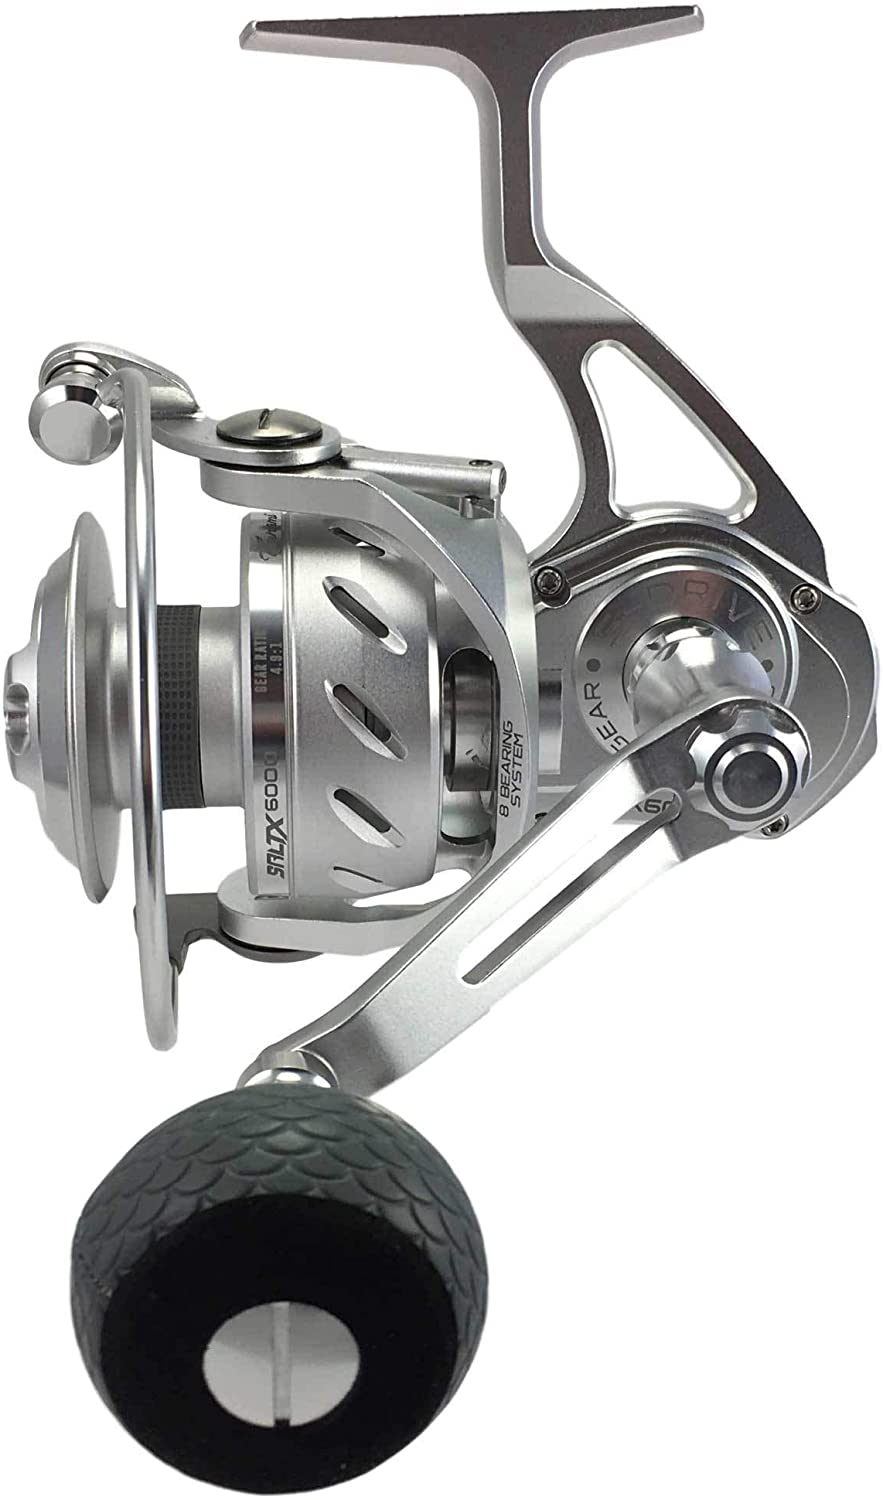 23 New Product Review - SaltX Reels 